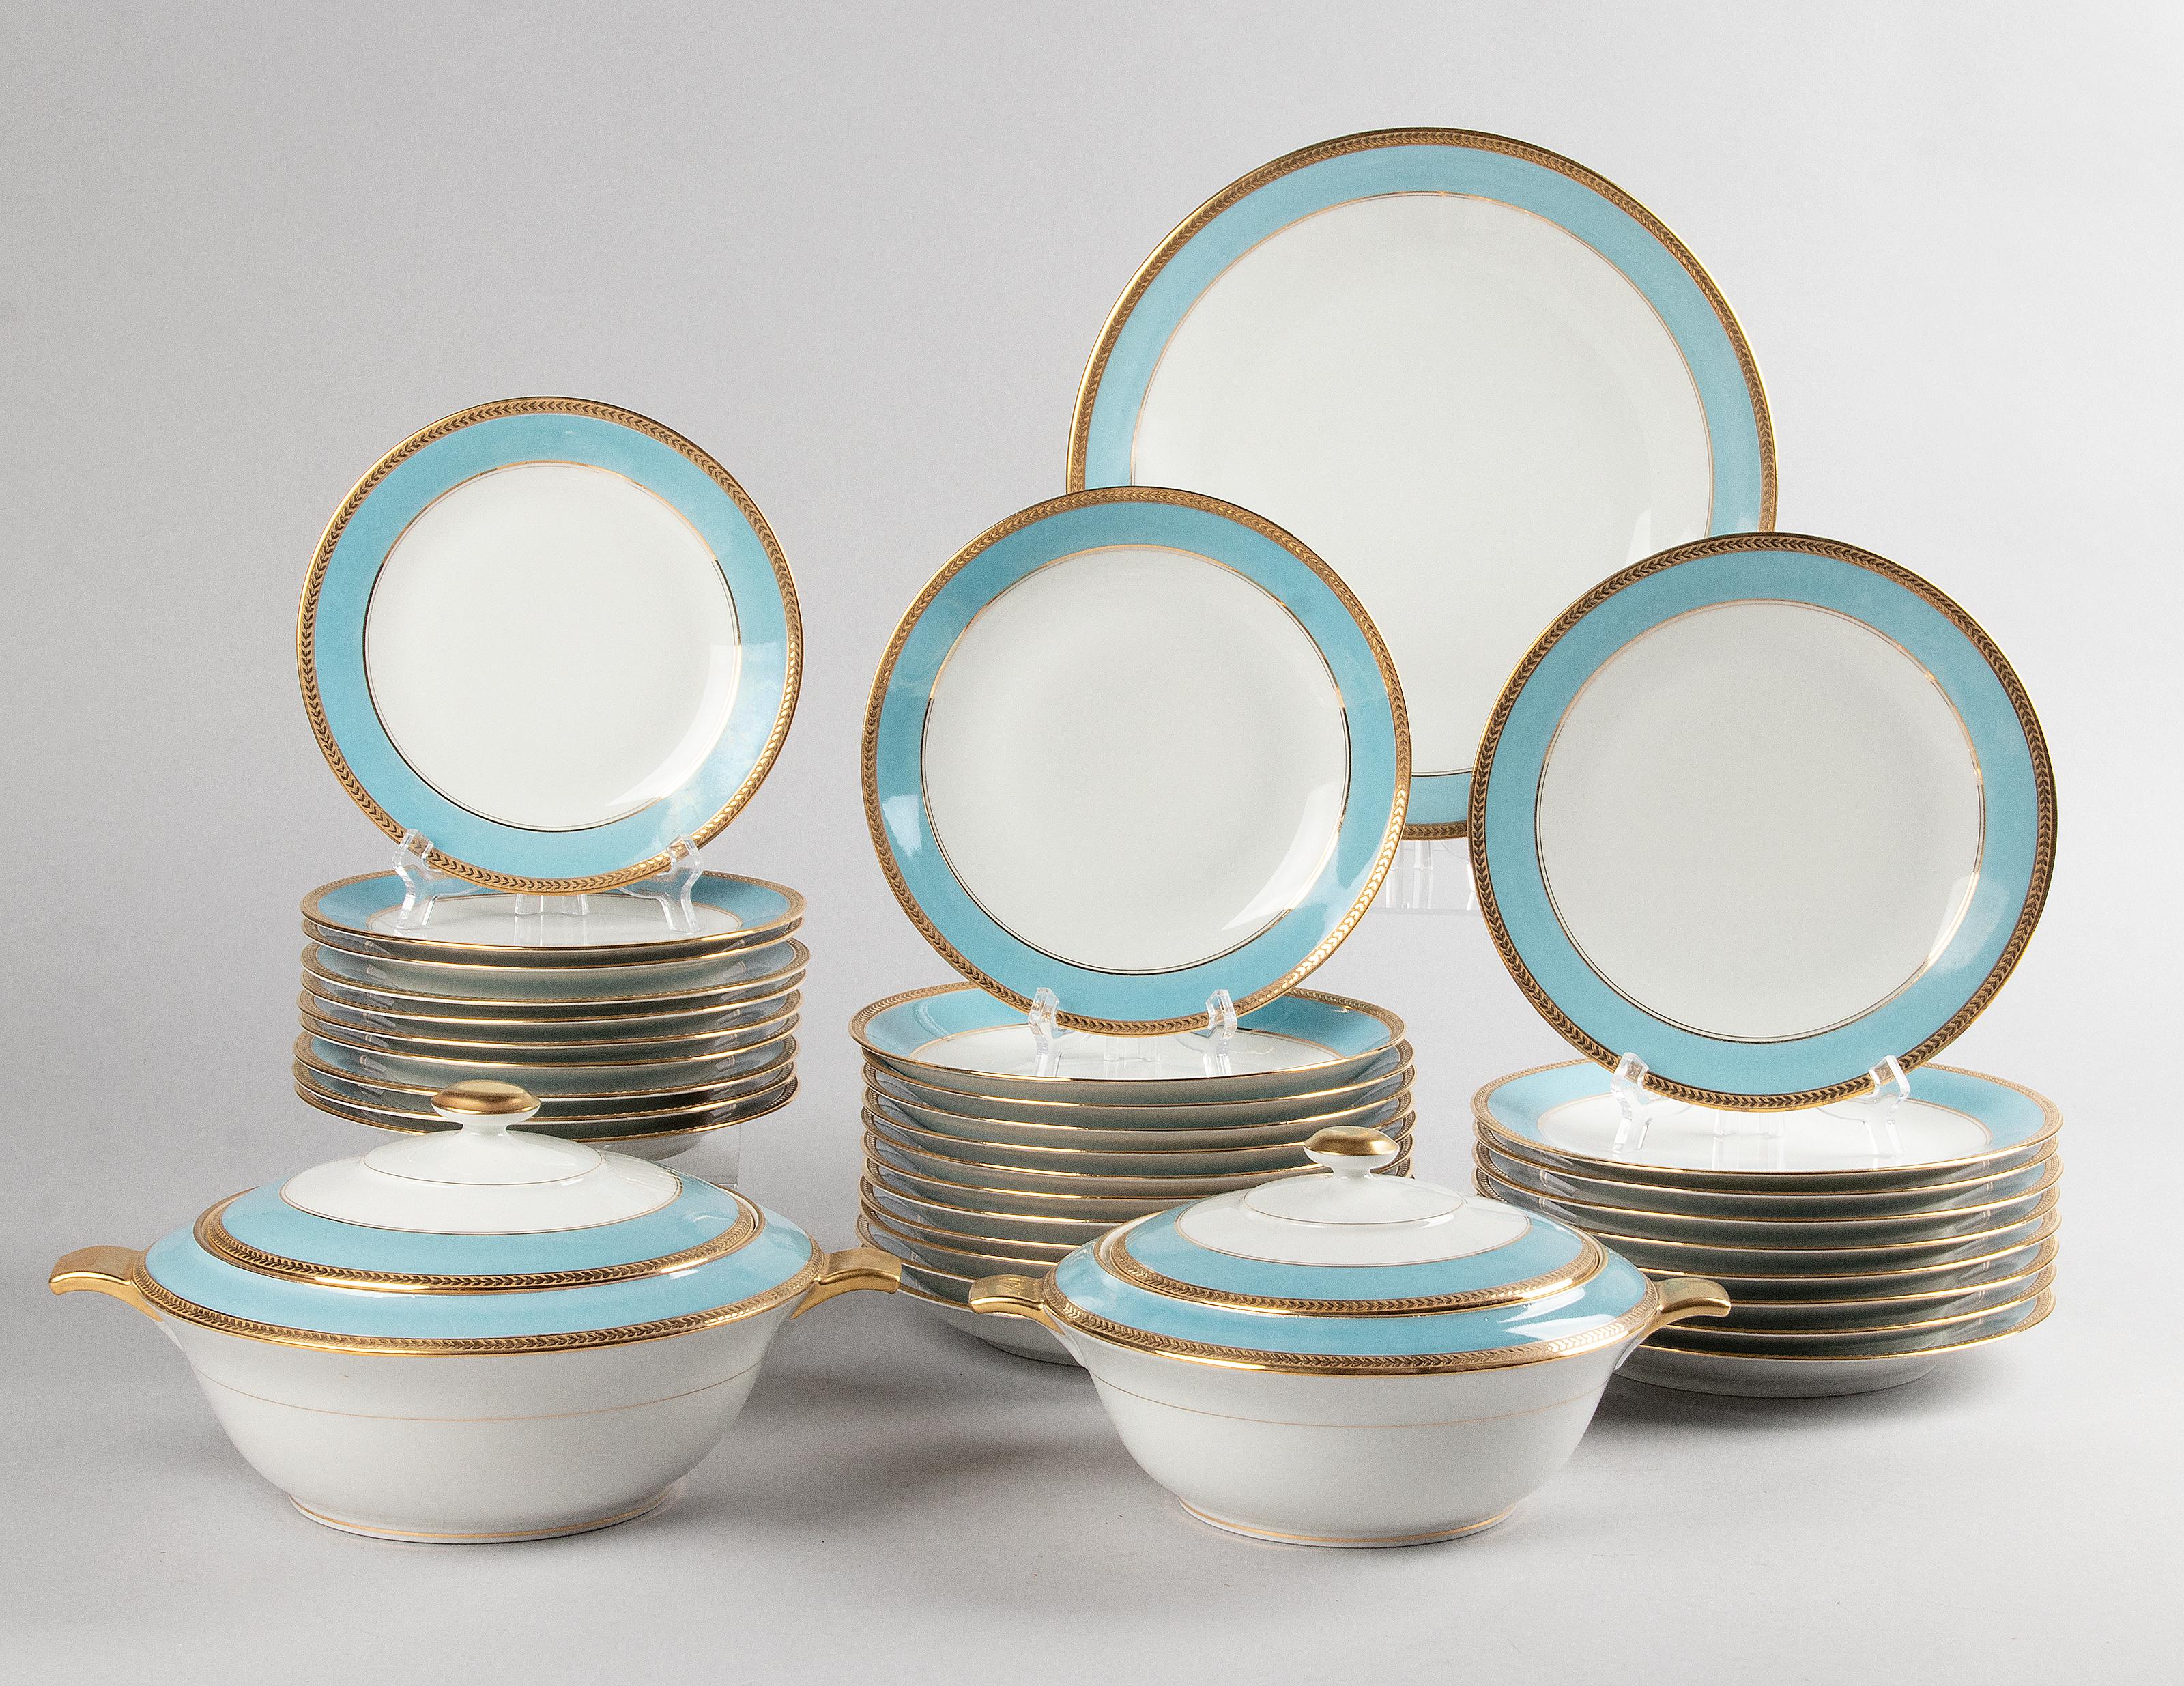 Beautiful porcelain table service from the French brand Limoges. The tableware is decorated with wide blue edges and gold-coloured rims. The porcelain is of a beautiful quality and is in very nice condition. The composition of the set is as follows: